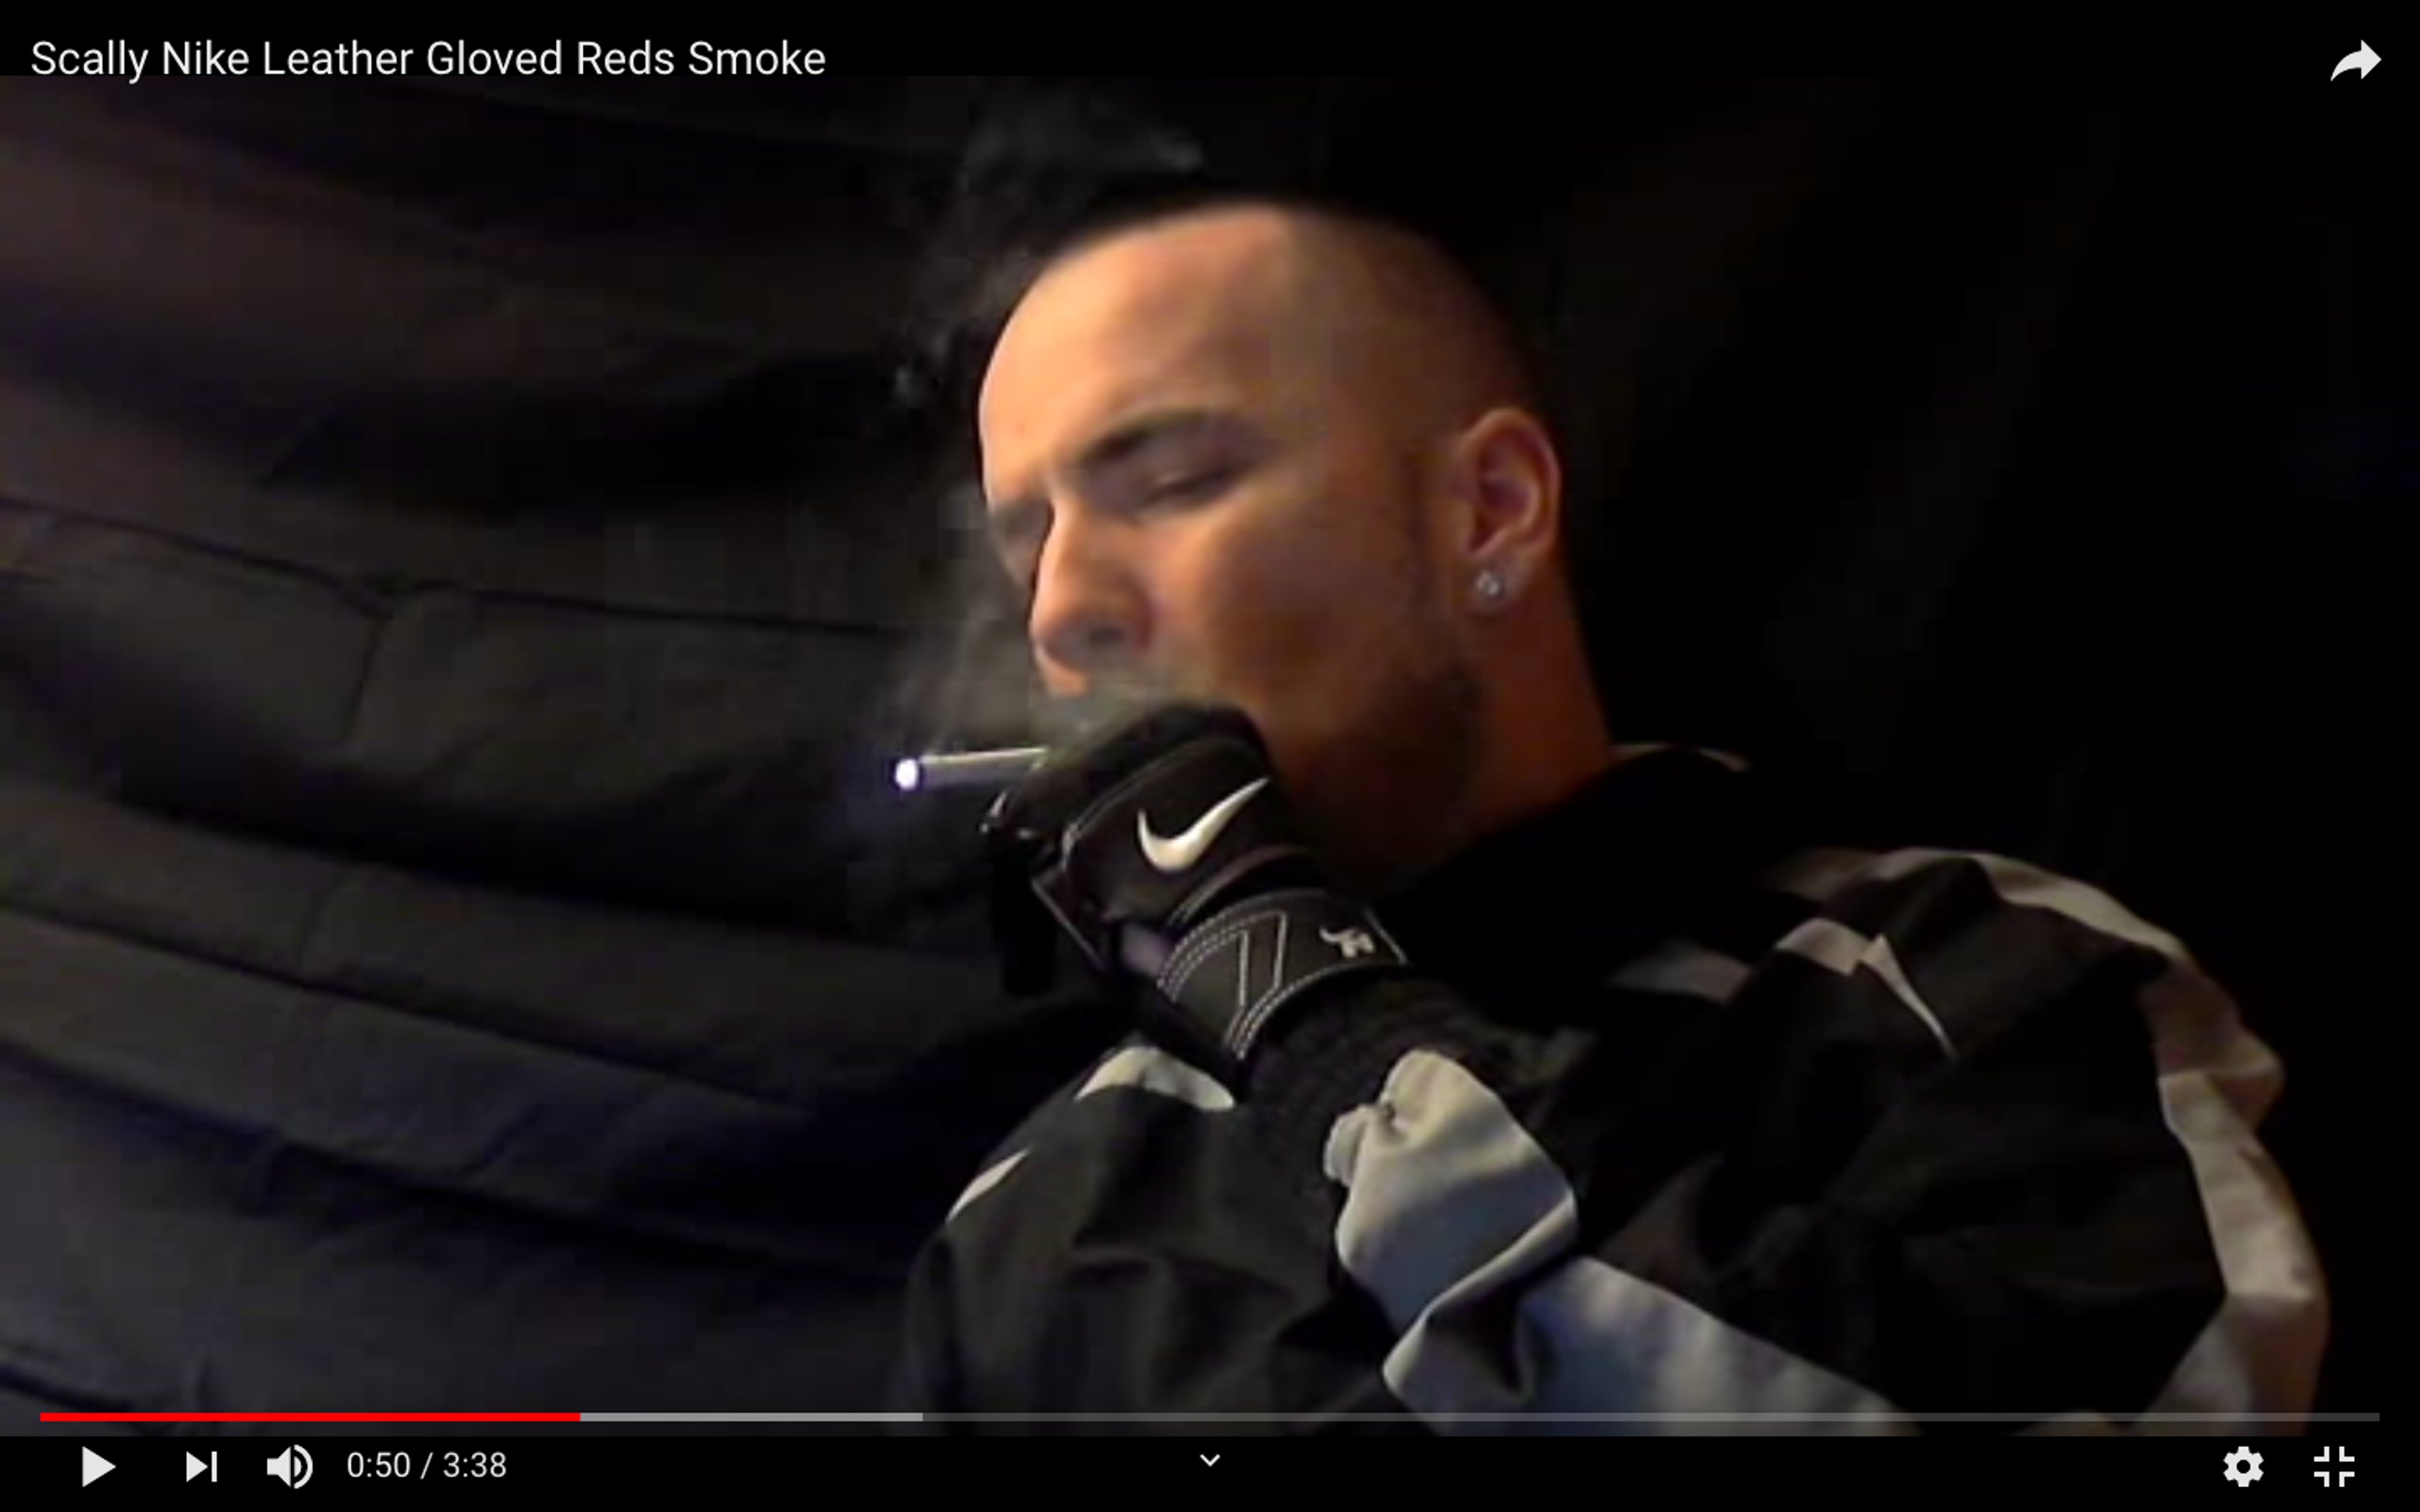 Youtube screenshot of CHAVSCUMBOSS smoking with Nike gloves on, in front of a black backdrop